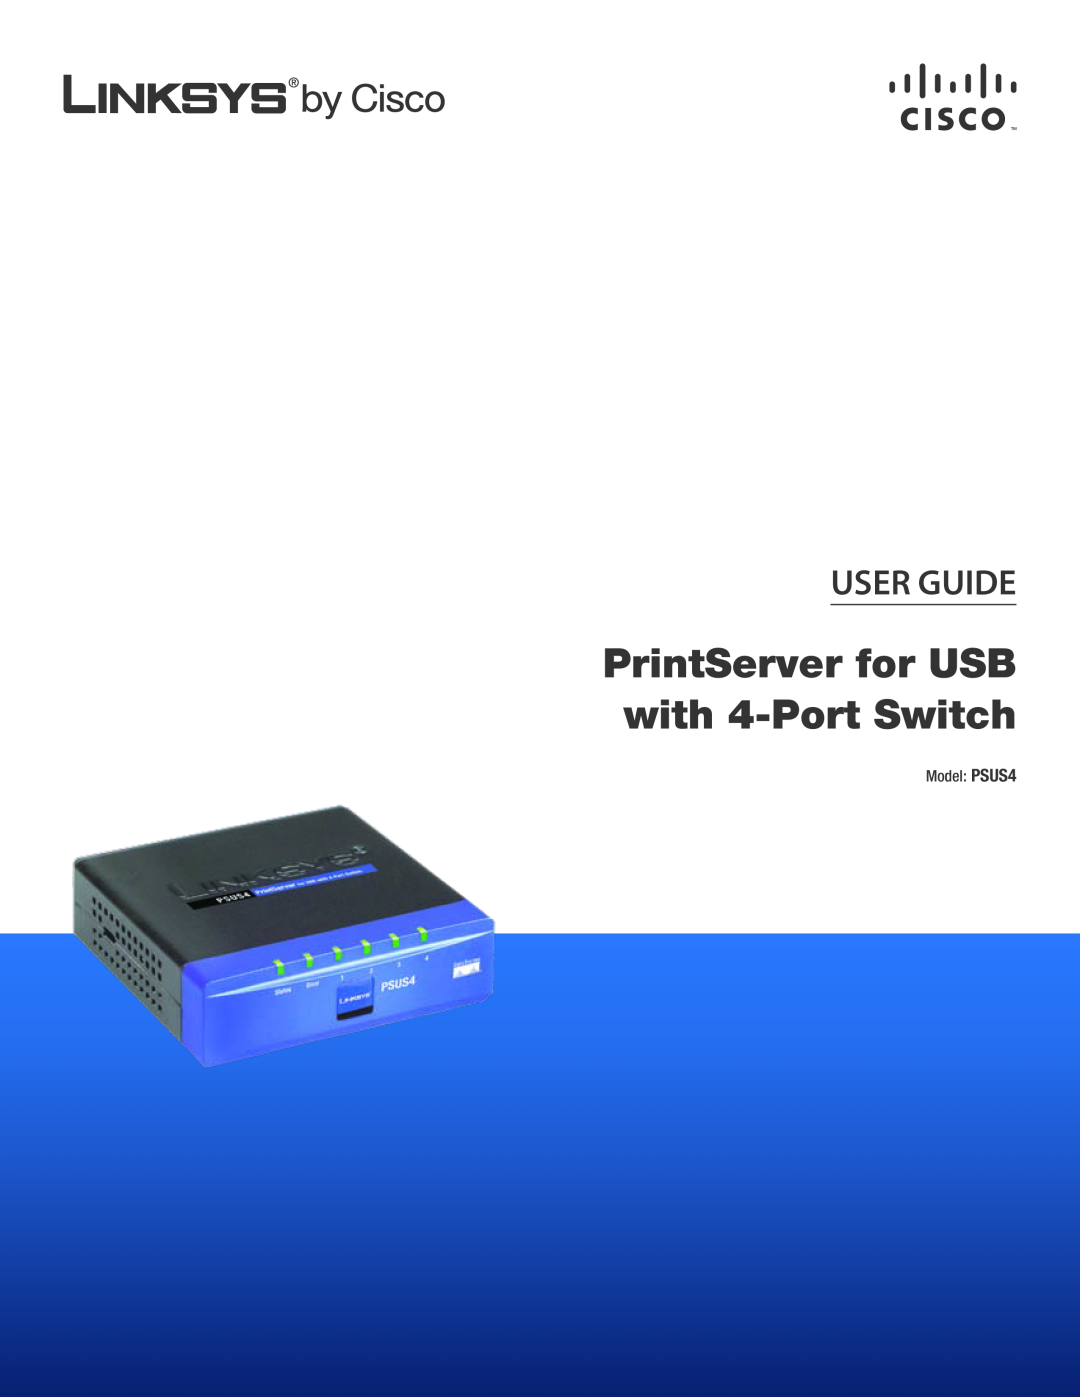 Cisco Systems manual PrintServer for USB with 4-Port Switch, User Guide, Model PSUS4 